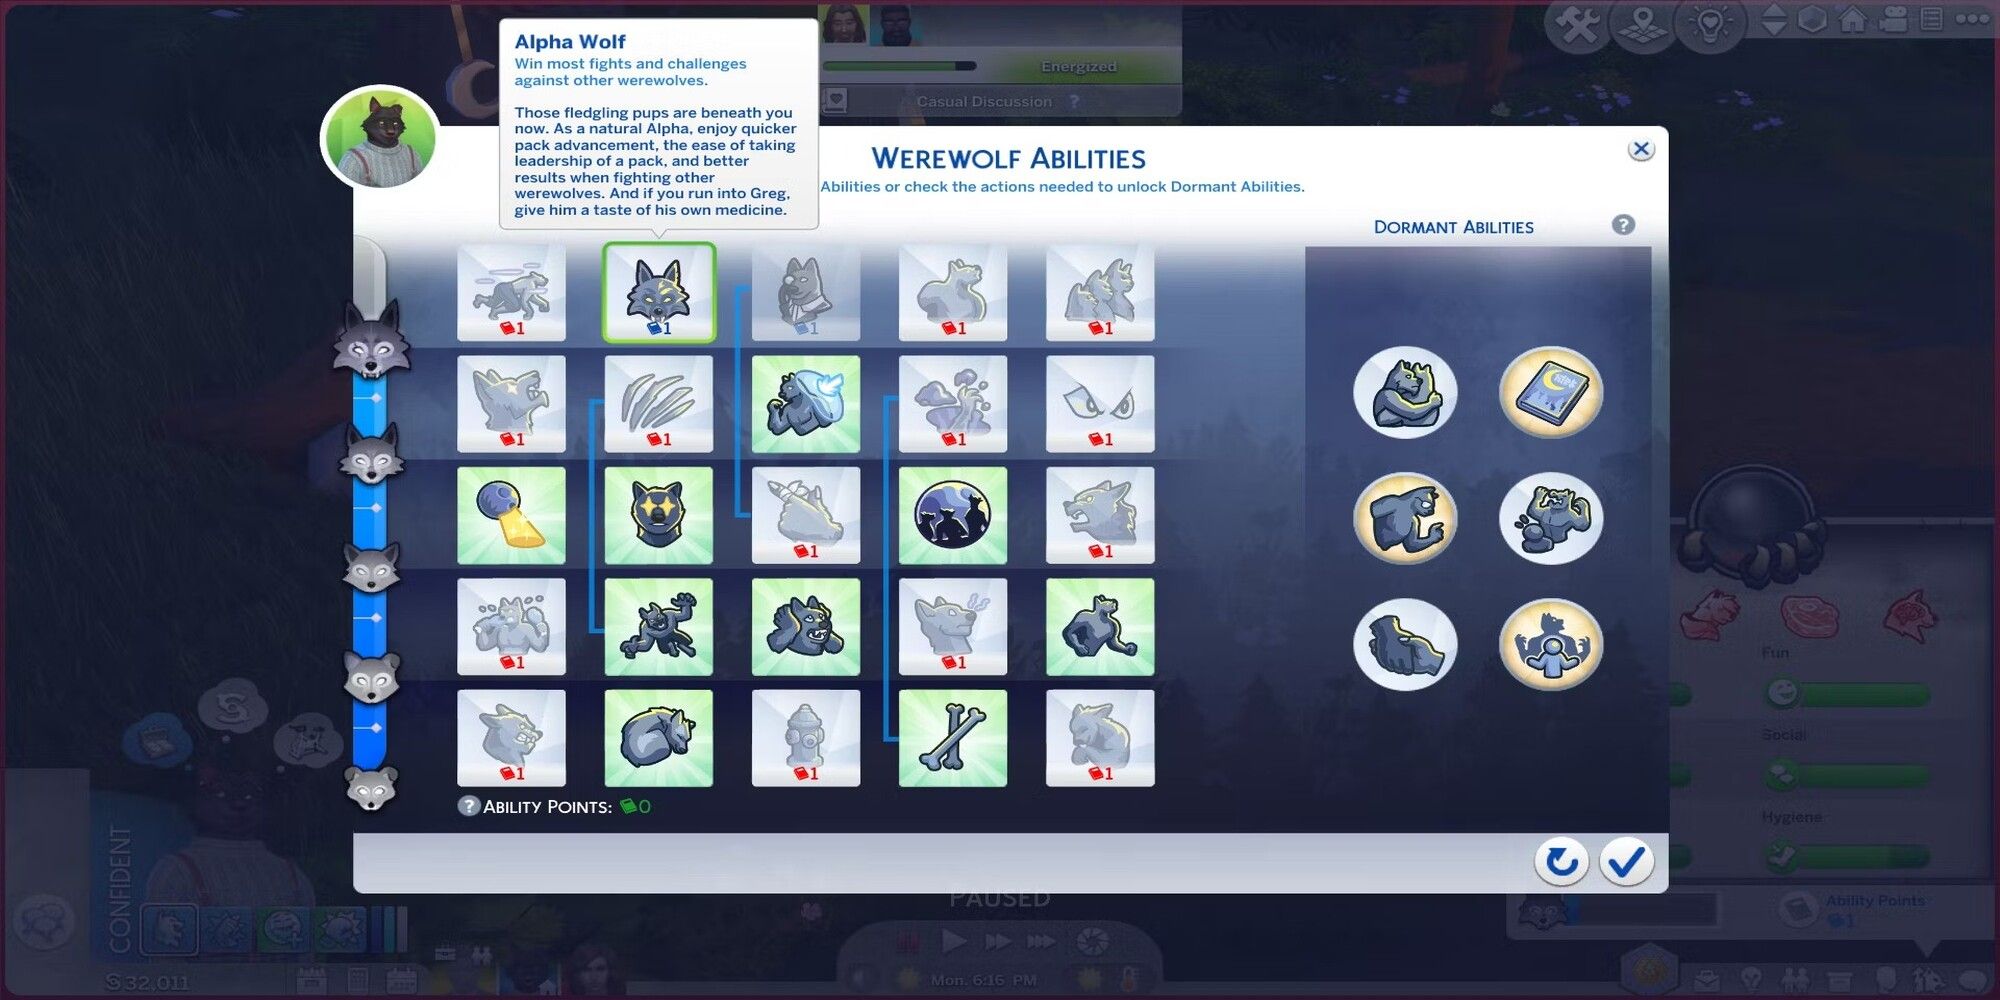 All werewolf abilities in the skills tree in The Sims 4